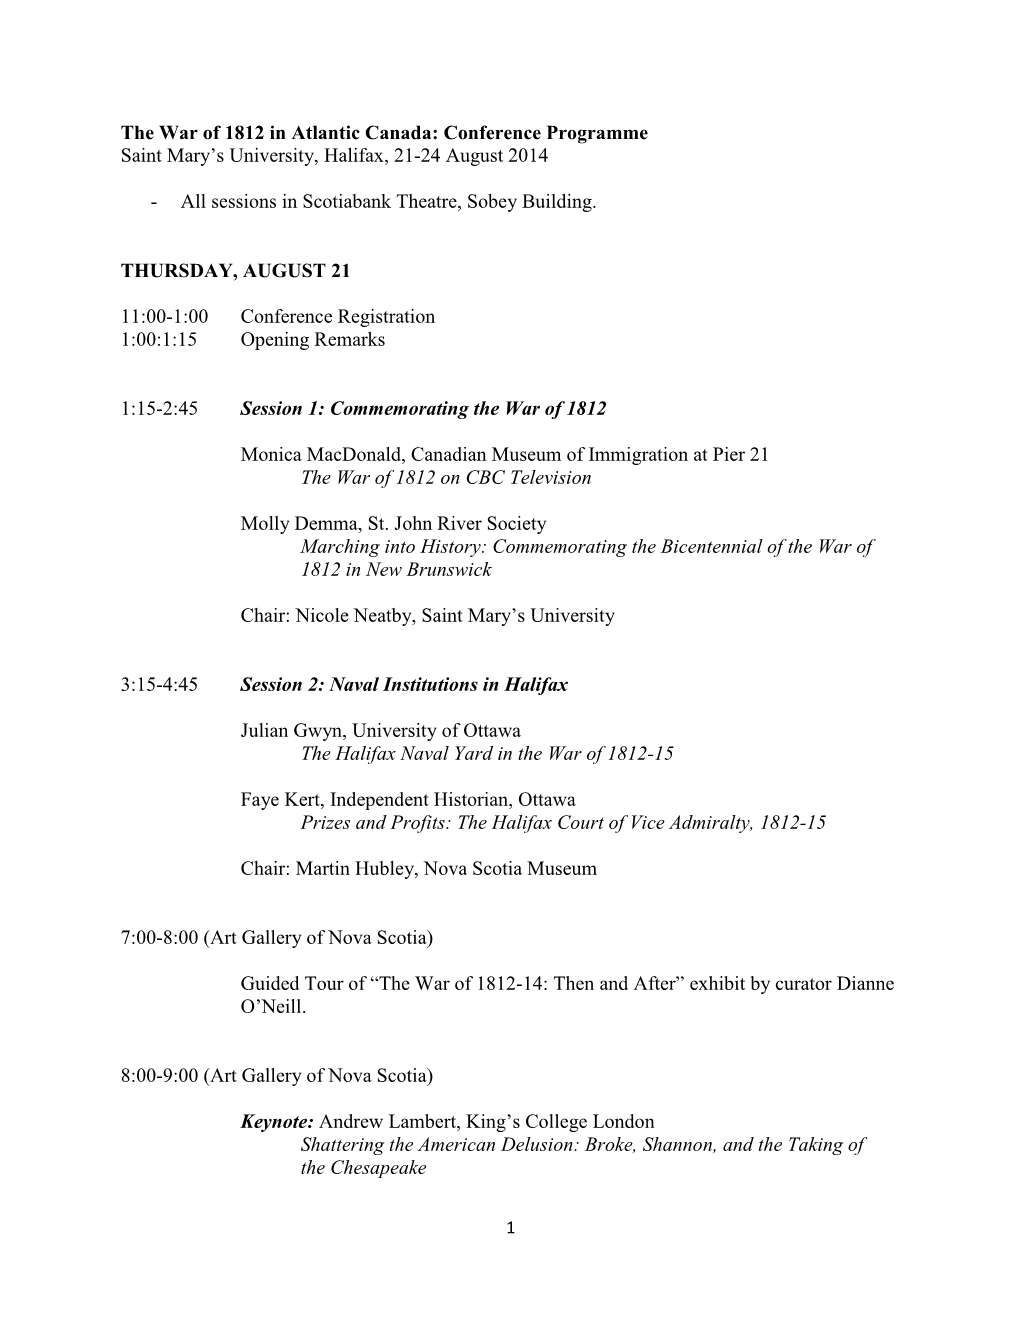 The War of 1812 in Atlantic Canada: Conference Programme Saint Mary’S University, Halifax, 21-24 August 2014